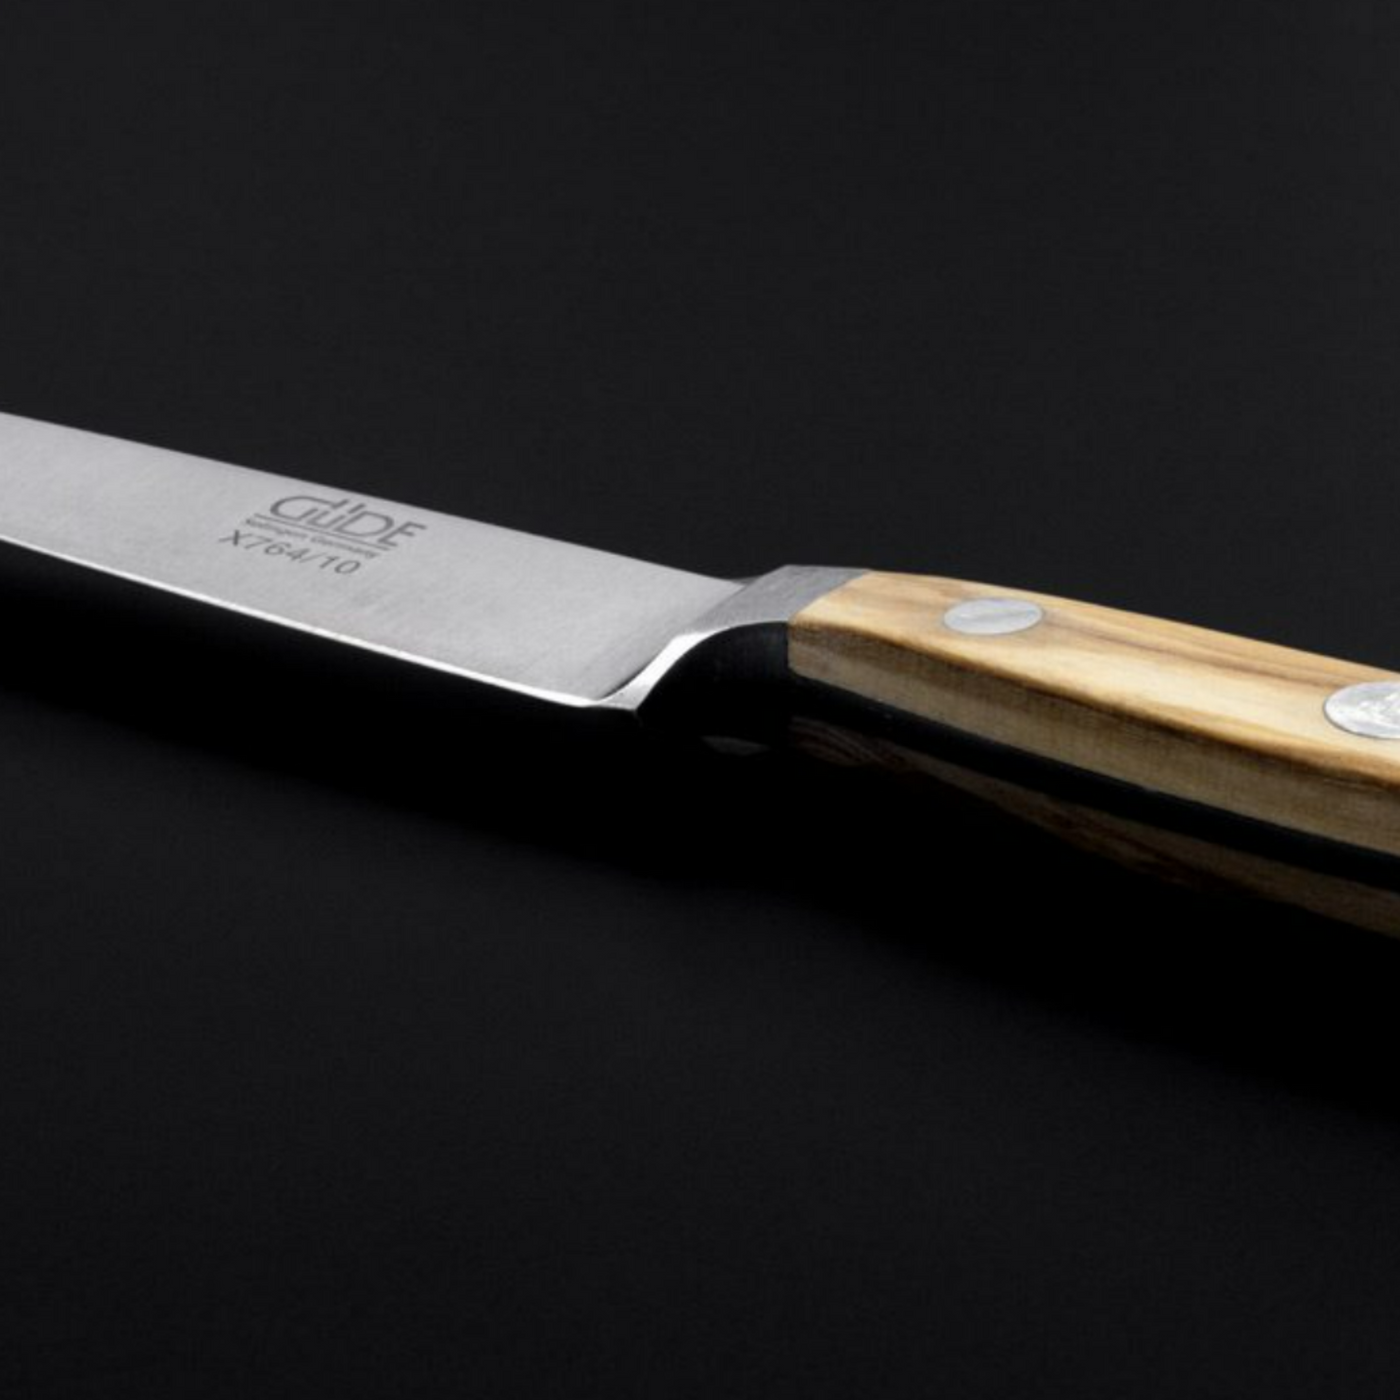 Gude Alpha Olive Chef's Knife With Olivewood Handle, 6-in - Kitchen Universe